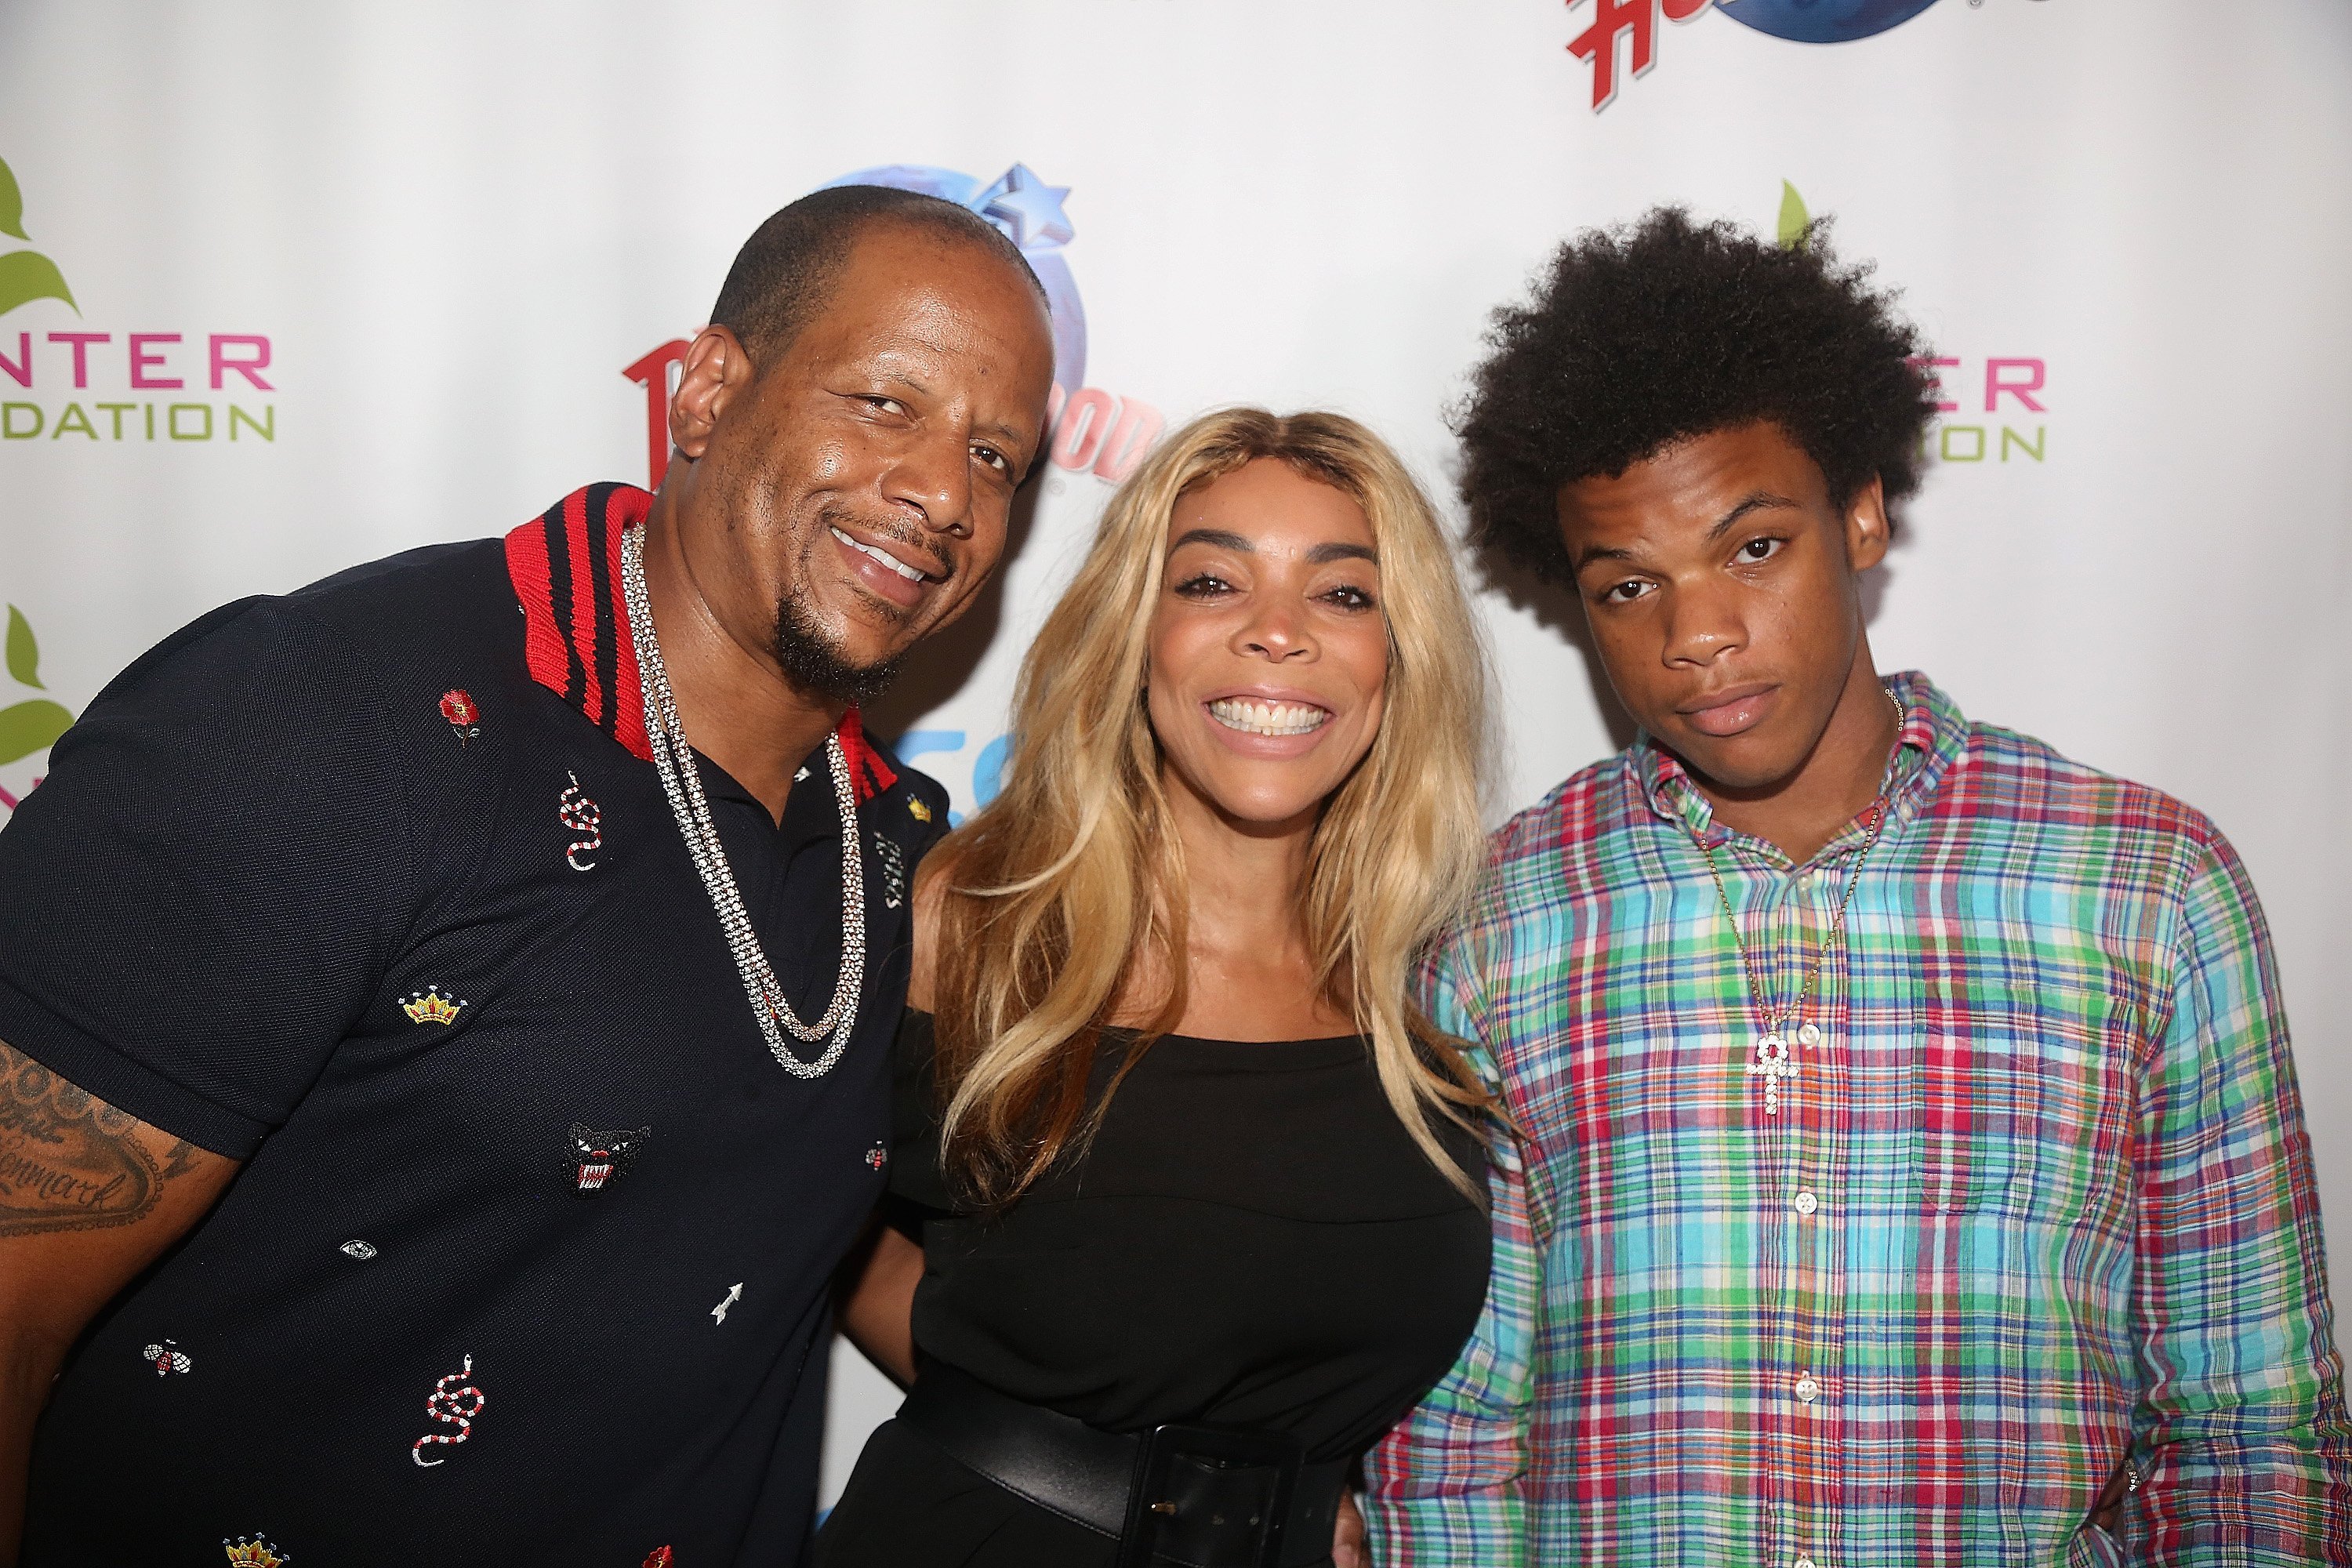 Kevin Hunter Sr., Wendy Williams, and their son Kevin Hunter Jr. | Photo: Getty Images